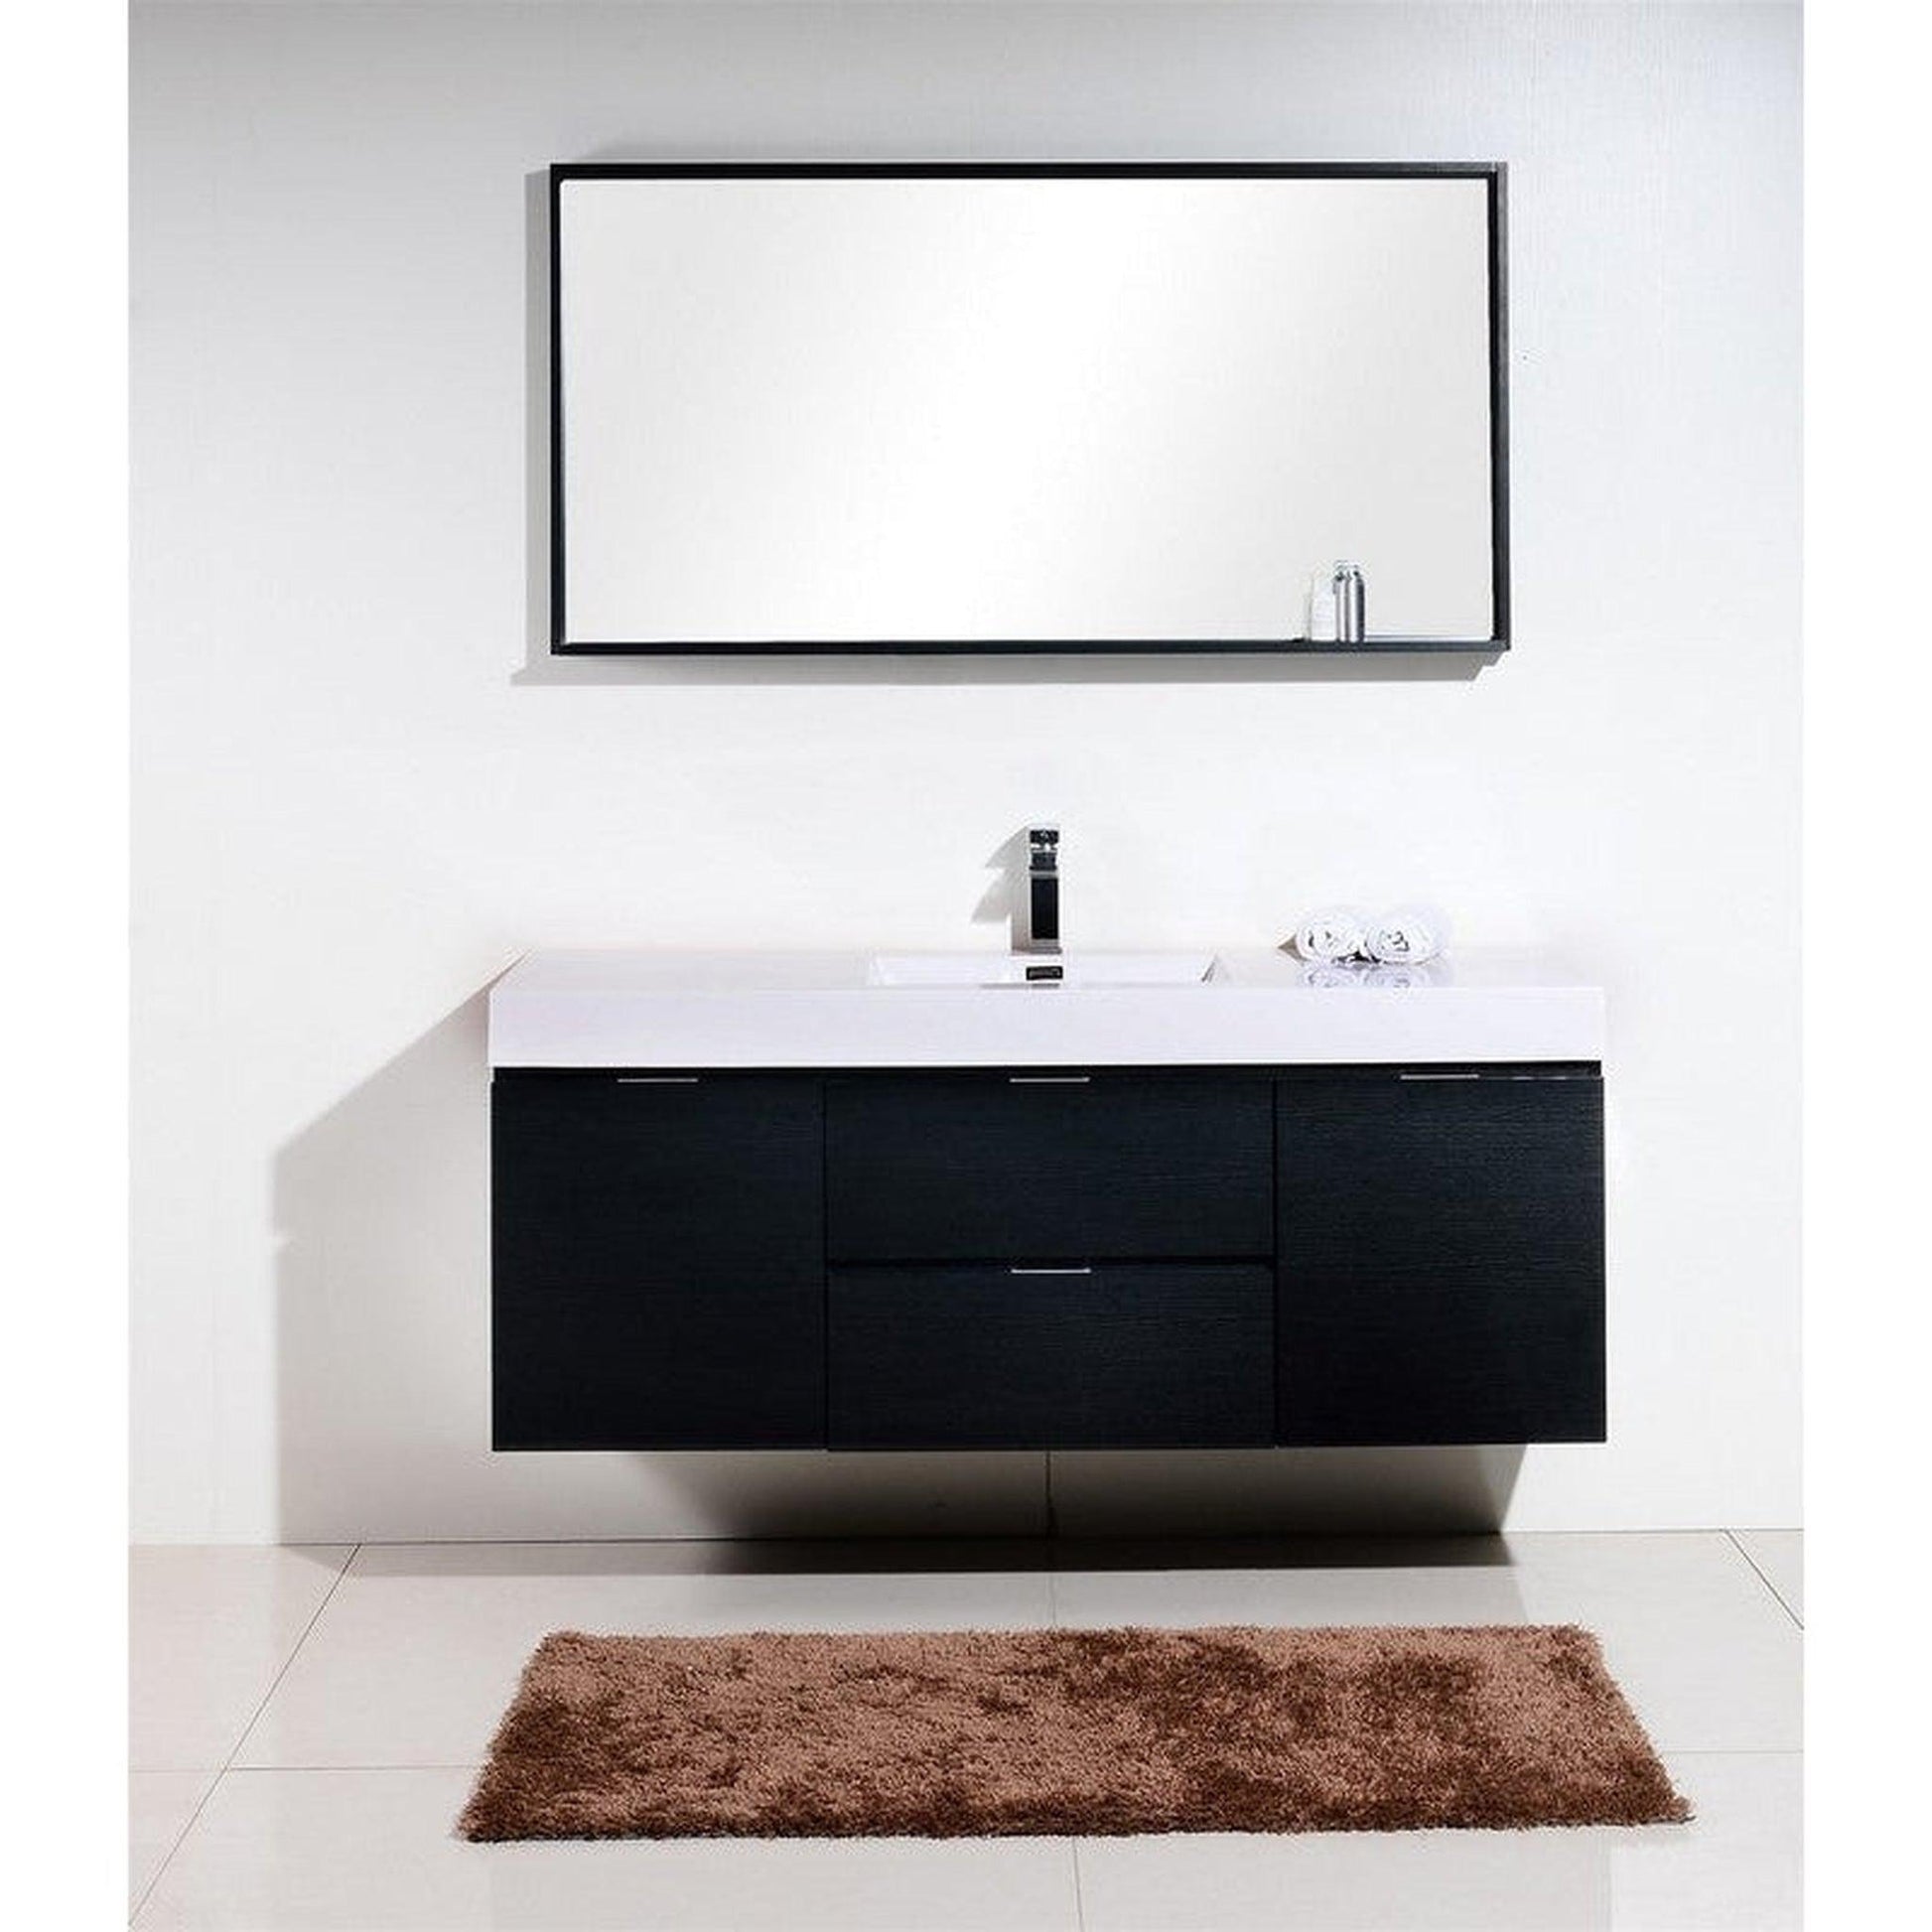 KubeBath Bliss 60" Black Wall-Mounted Modern Bathroom Vanity With Single Integrated Acrylic Sink With Overflow and 55" Black Framed Mirror With Shelf